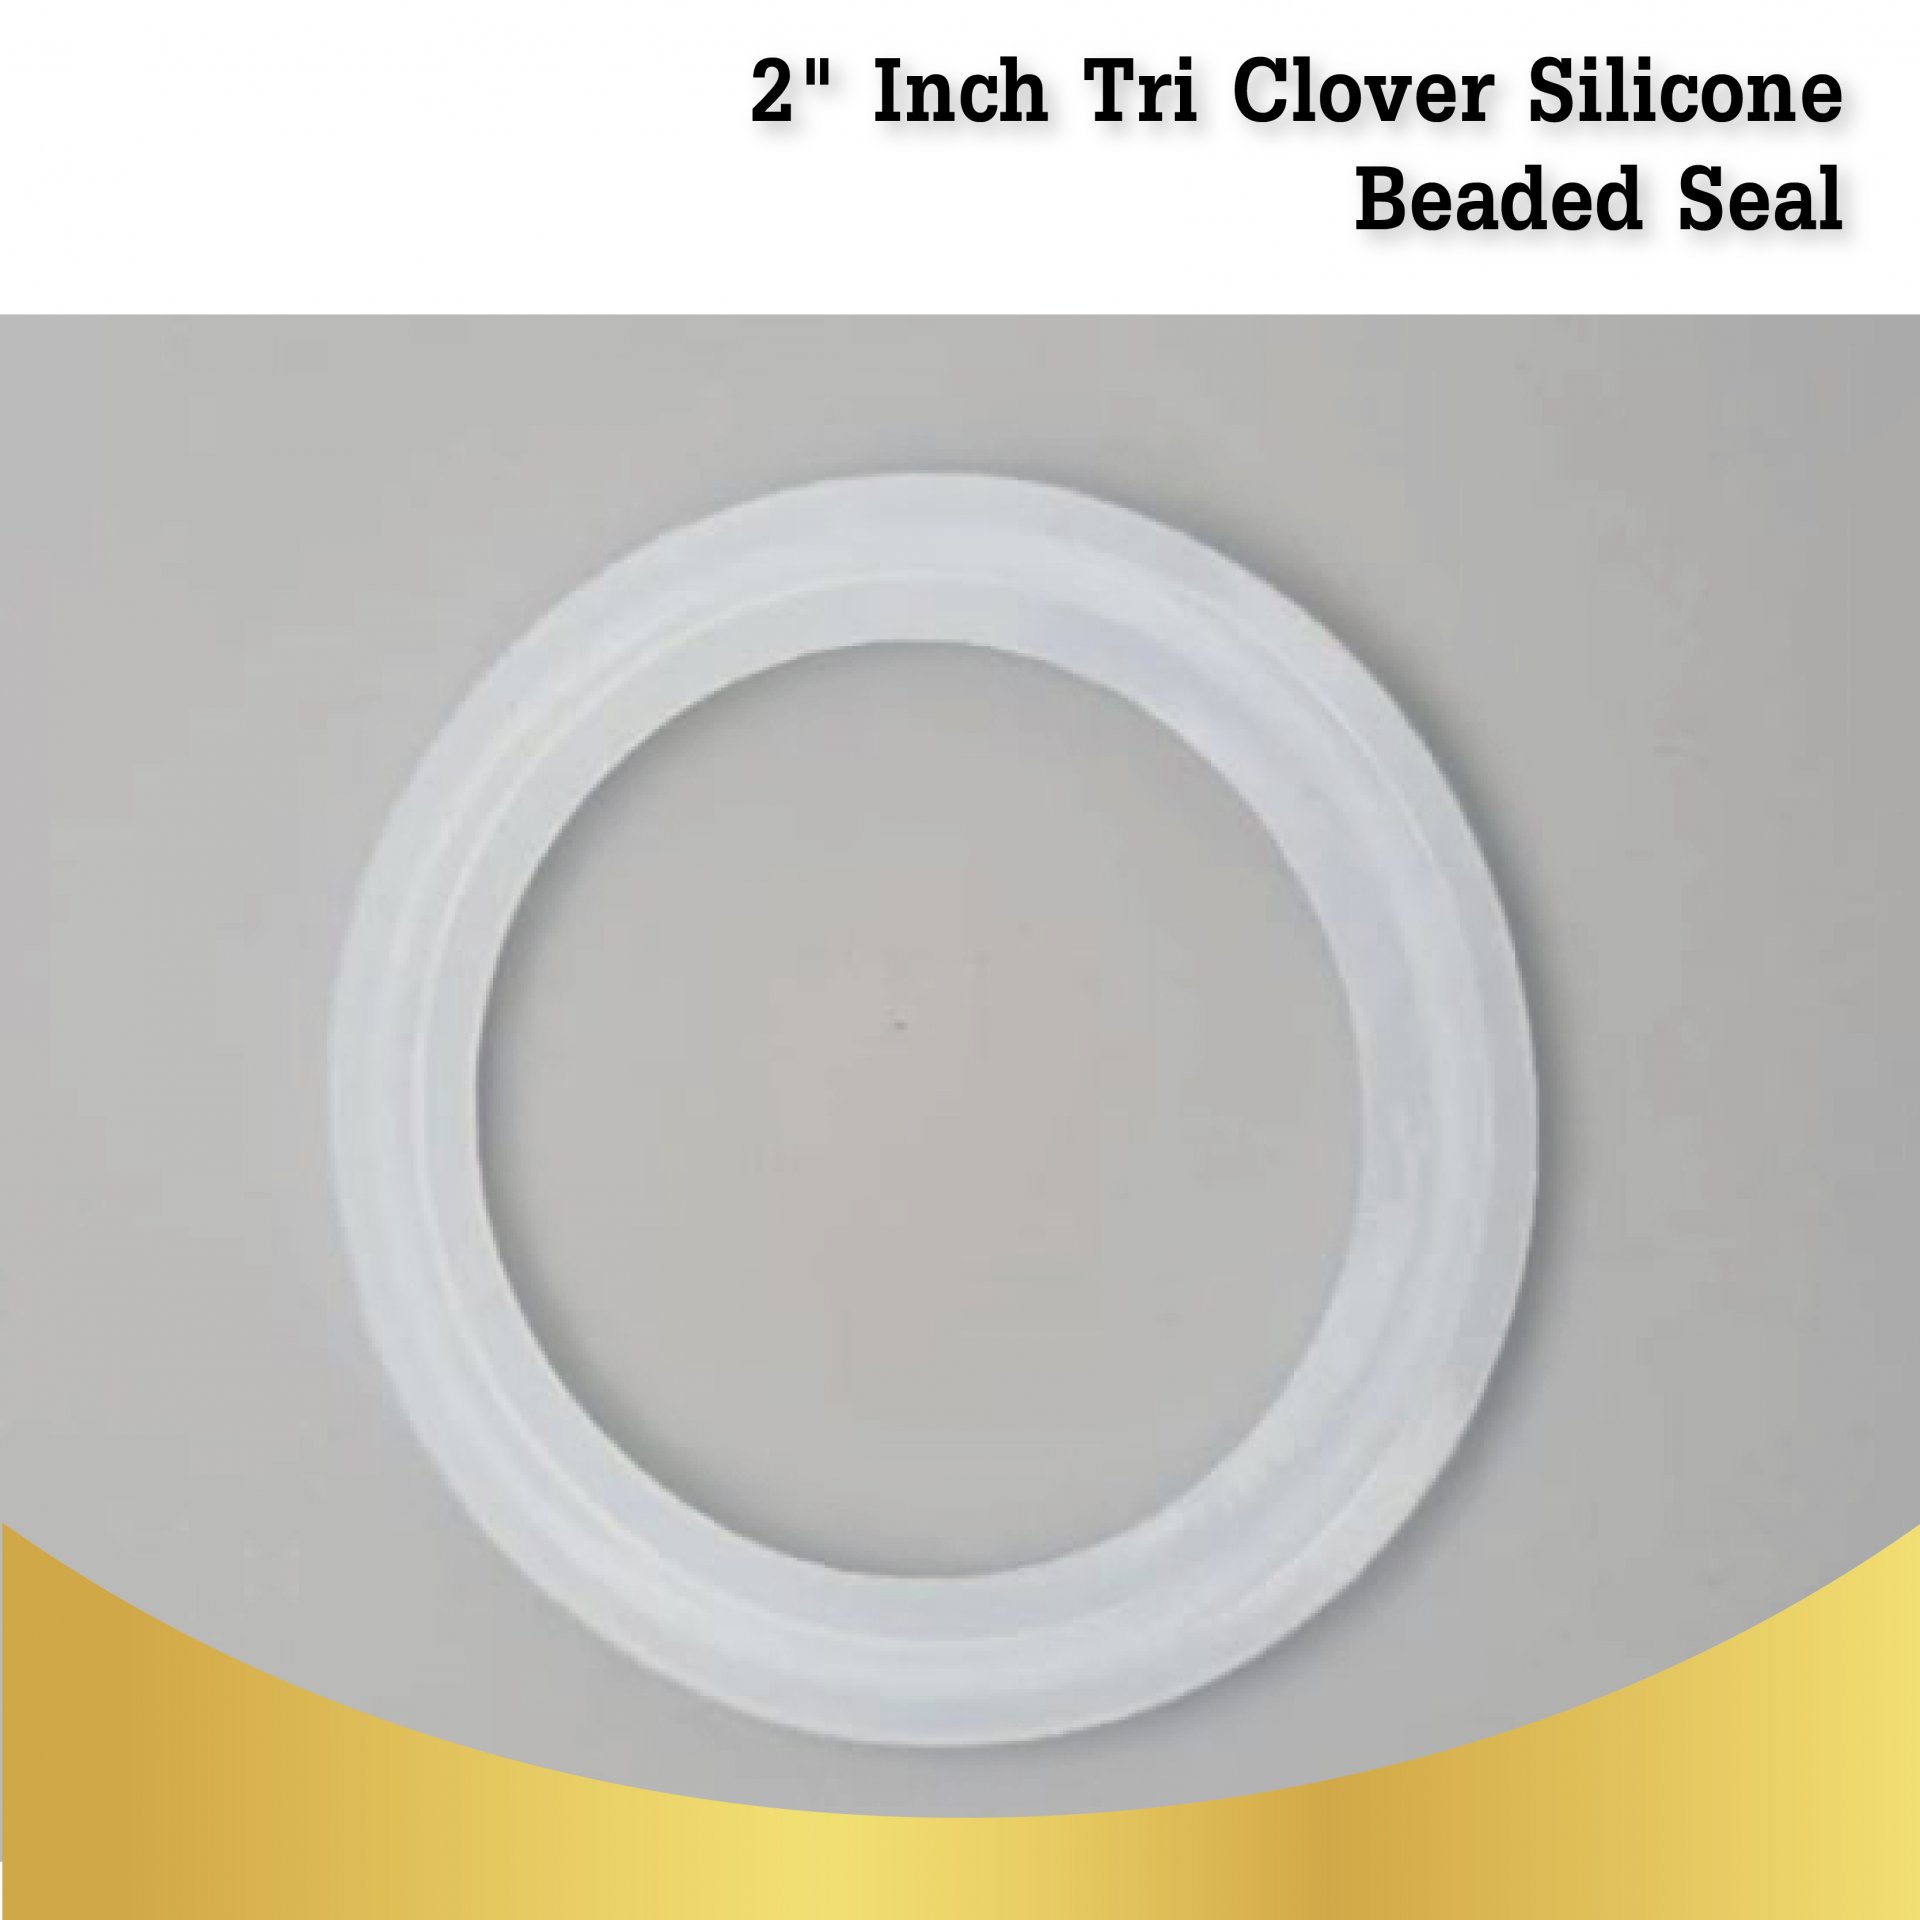 2 Inch Tri Clover Silicone Beaded Seal